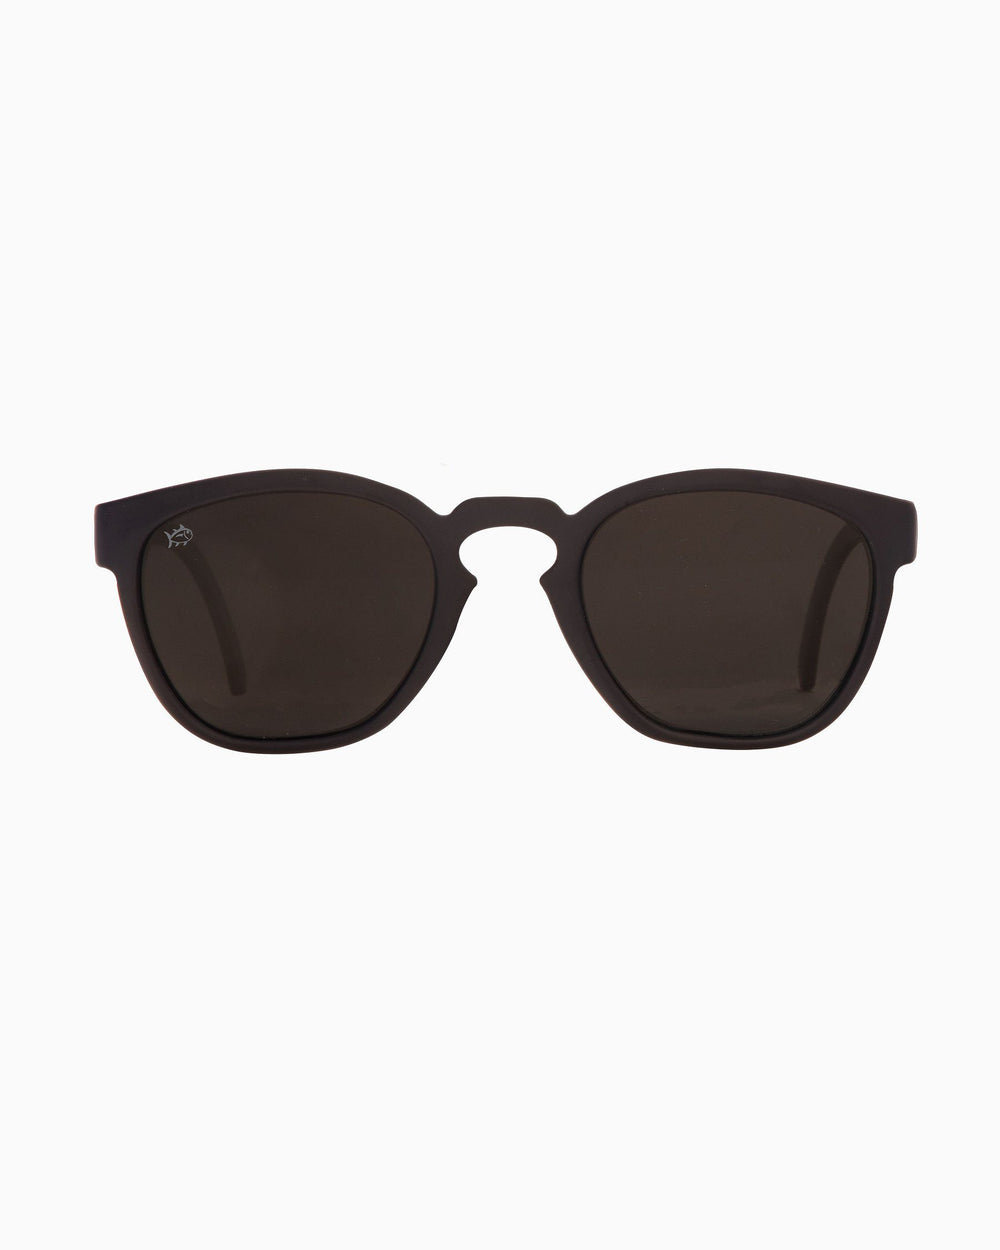 The front of the Rheos Seabrooks Sunglasses by Southern Tide - Gunmetal